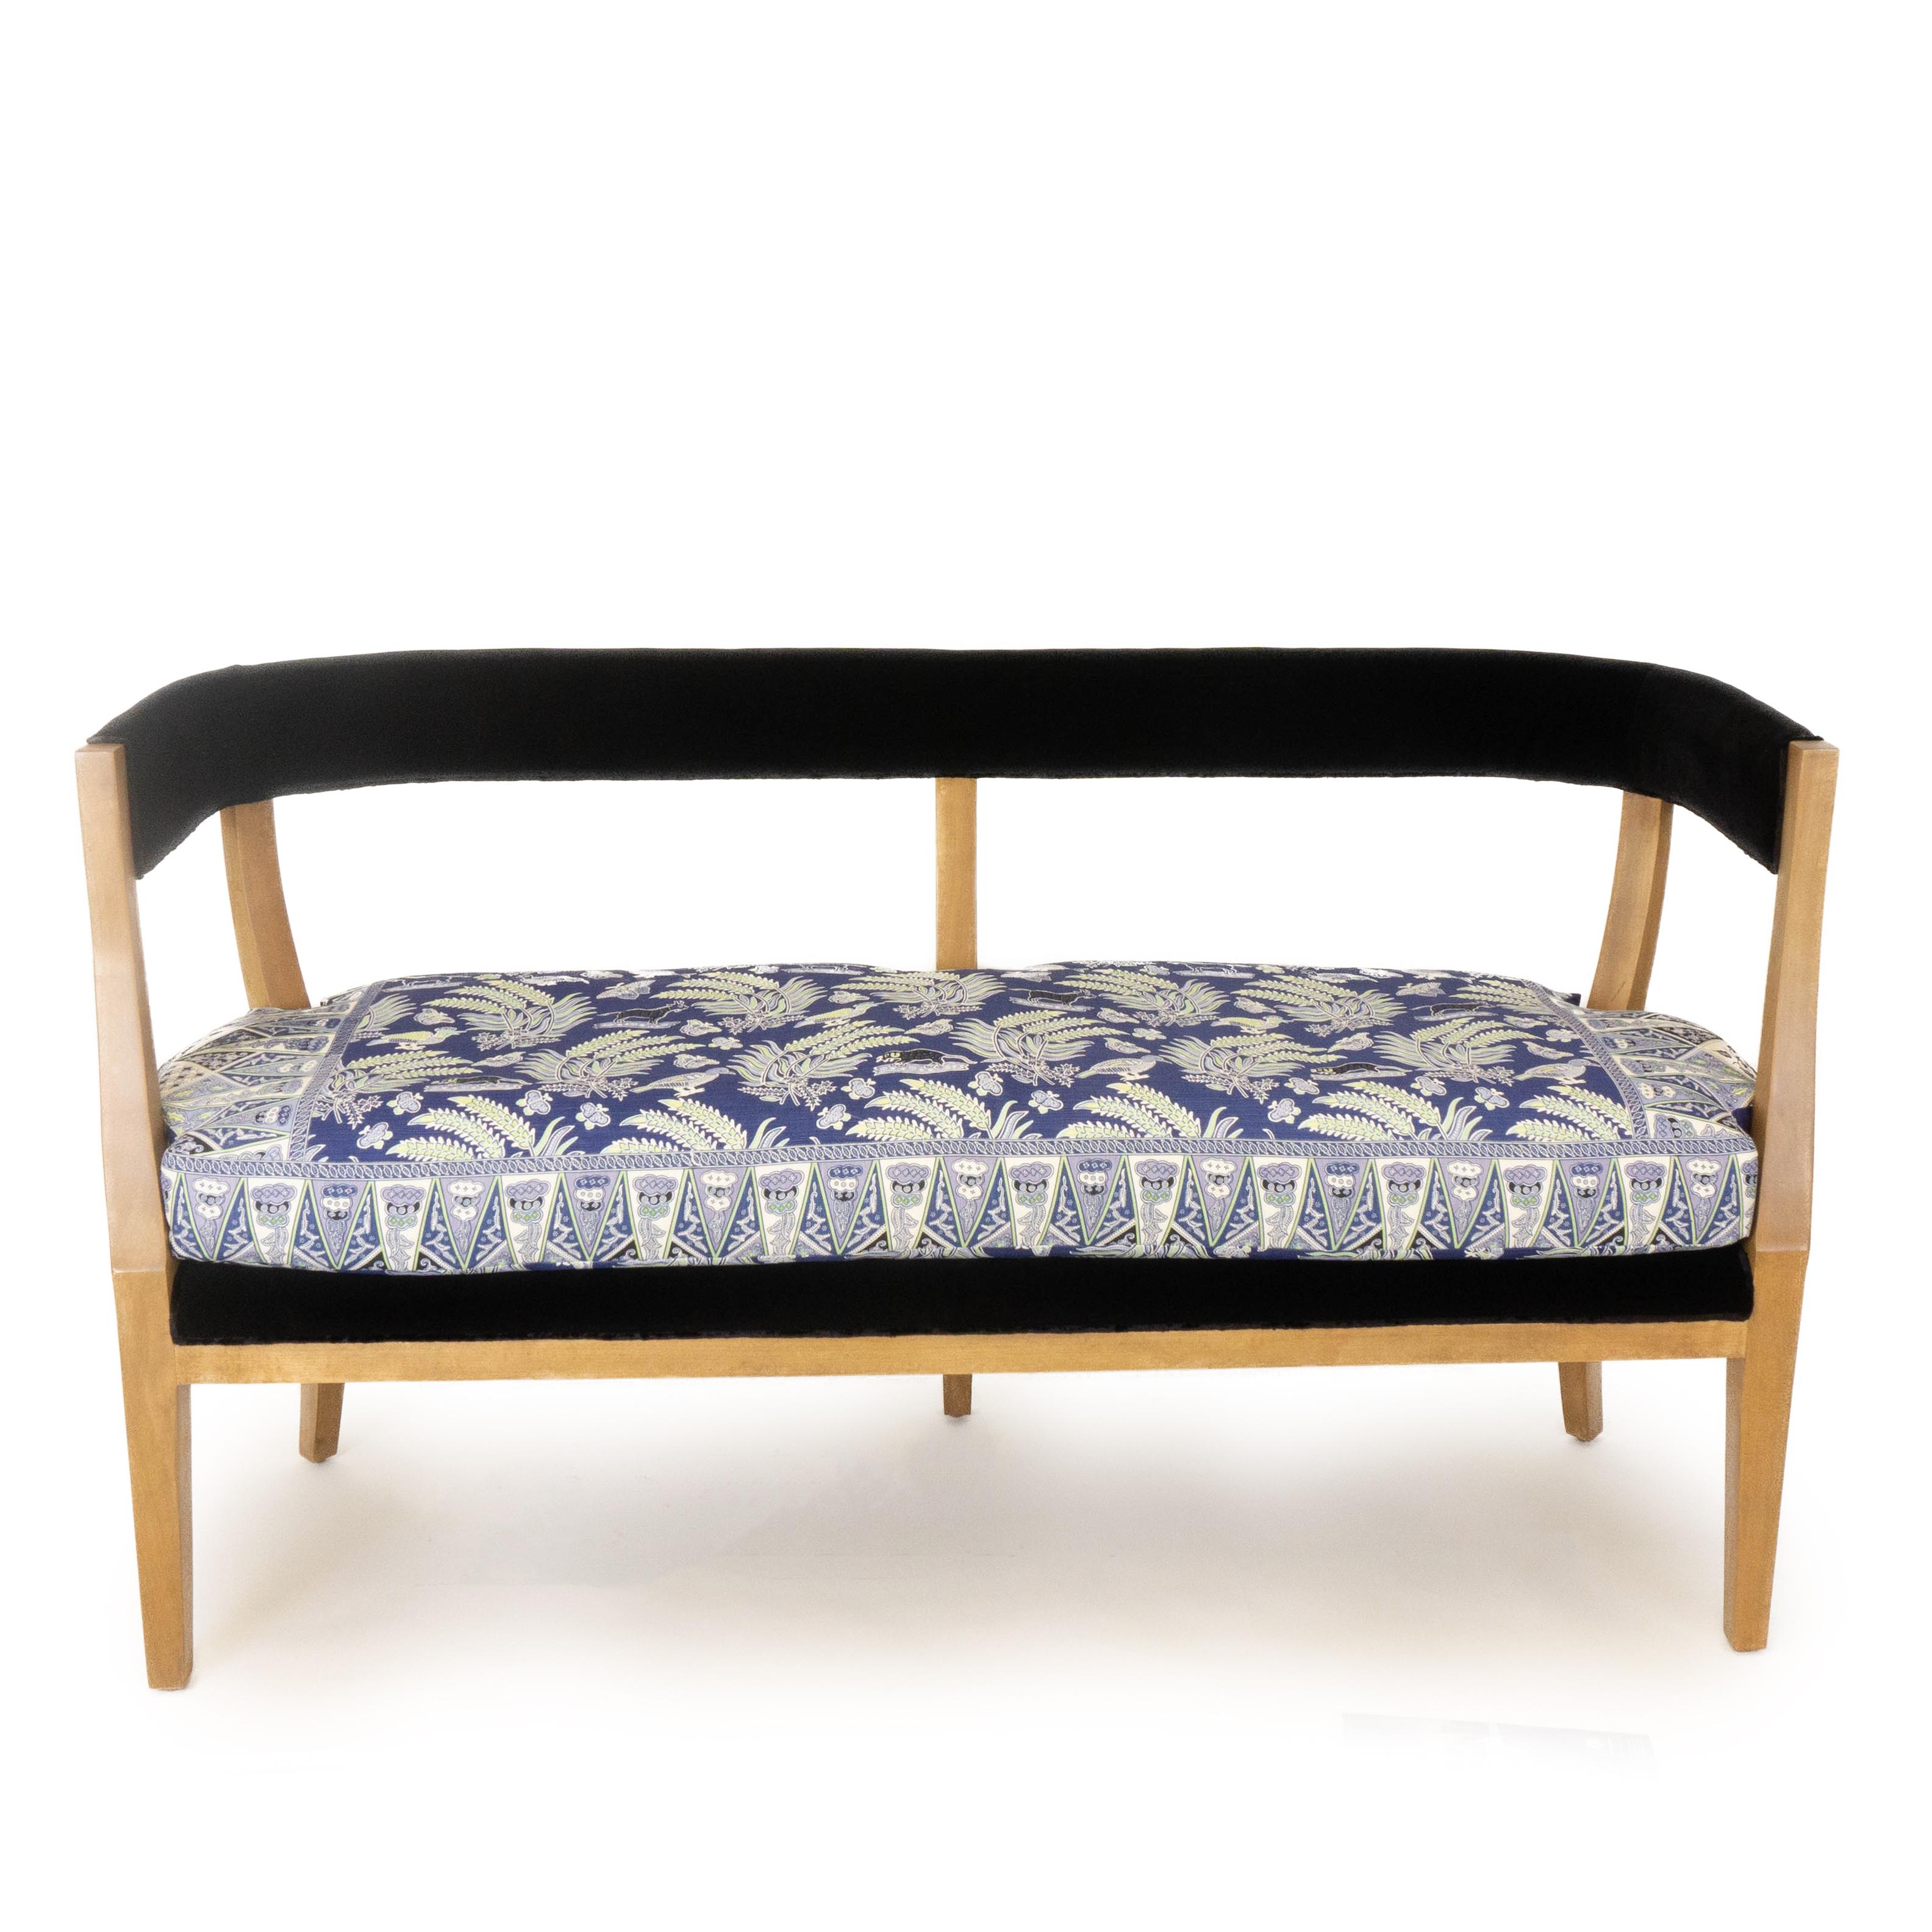 Modern classic curved back bench upholstered with black velvet and botanical patterned loose cushion. Exposed poplar legs finished and stained by hand. The exposed wood leaves some visible natural markings. Hand carved and sculpted in our studio in